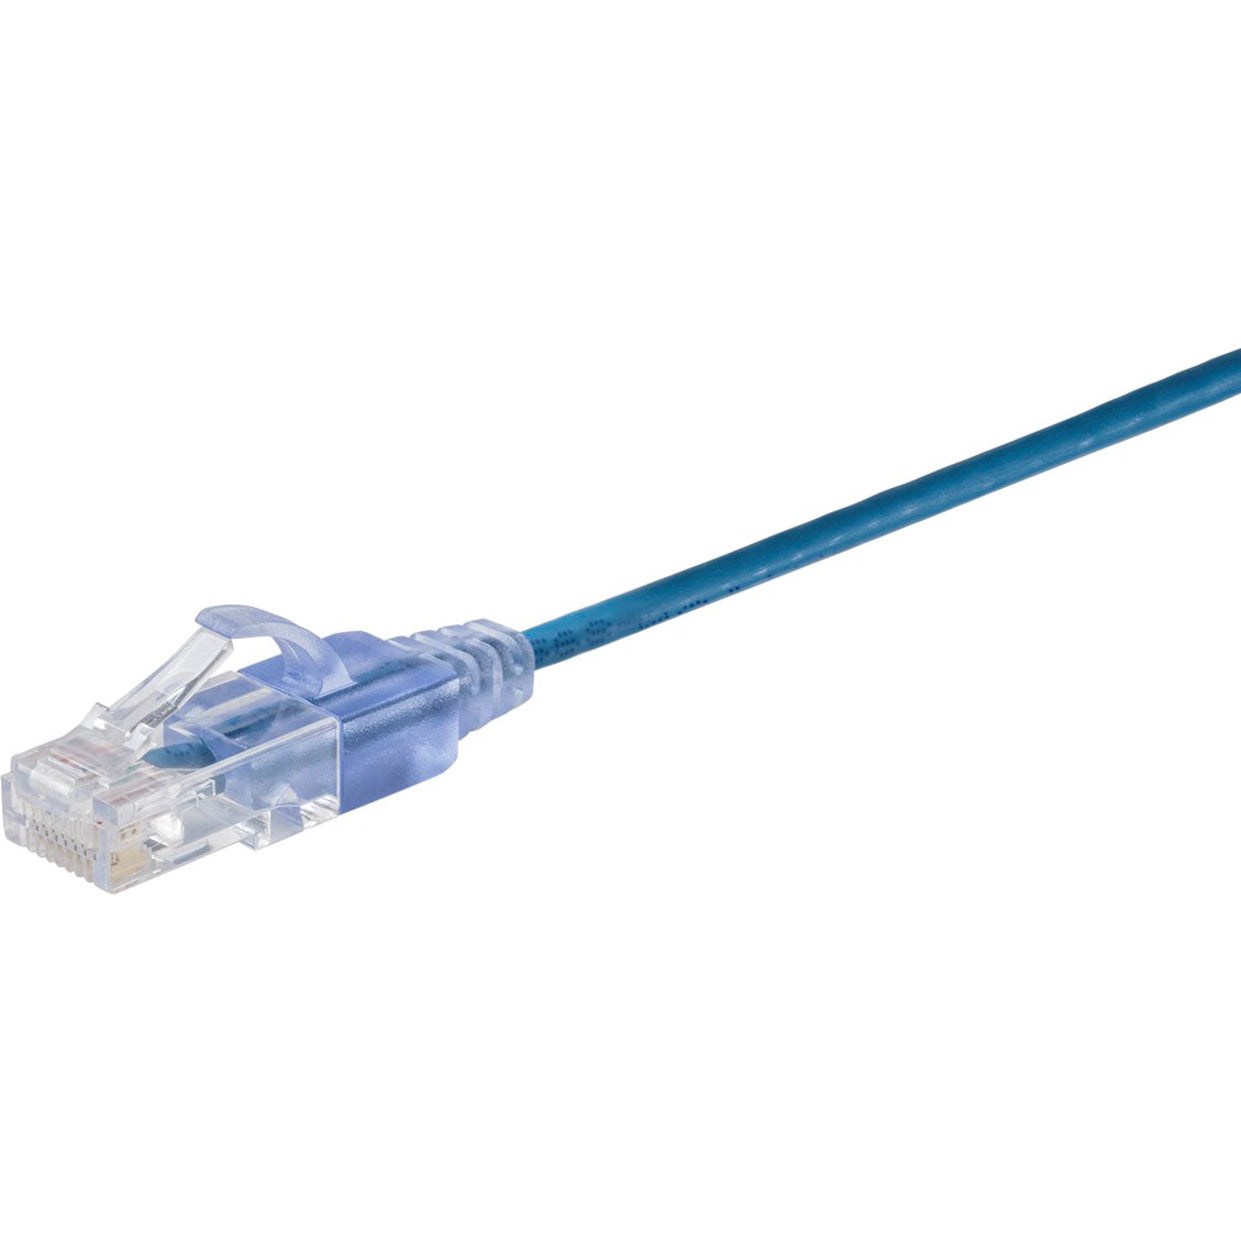 Monoprice 15166 SlimRun Cat6A Ethernet Network Patch Cable 10ft Blue, 10-Pack